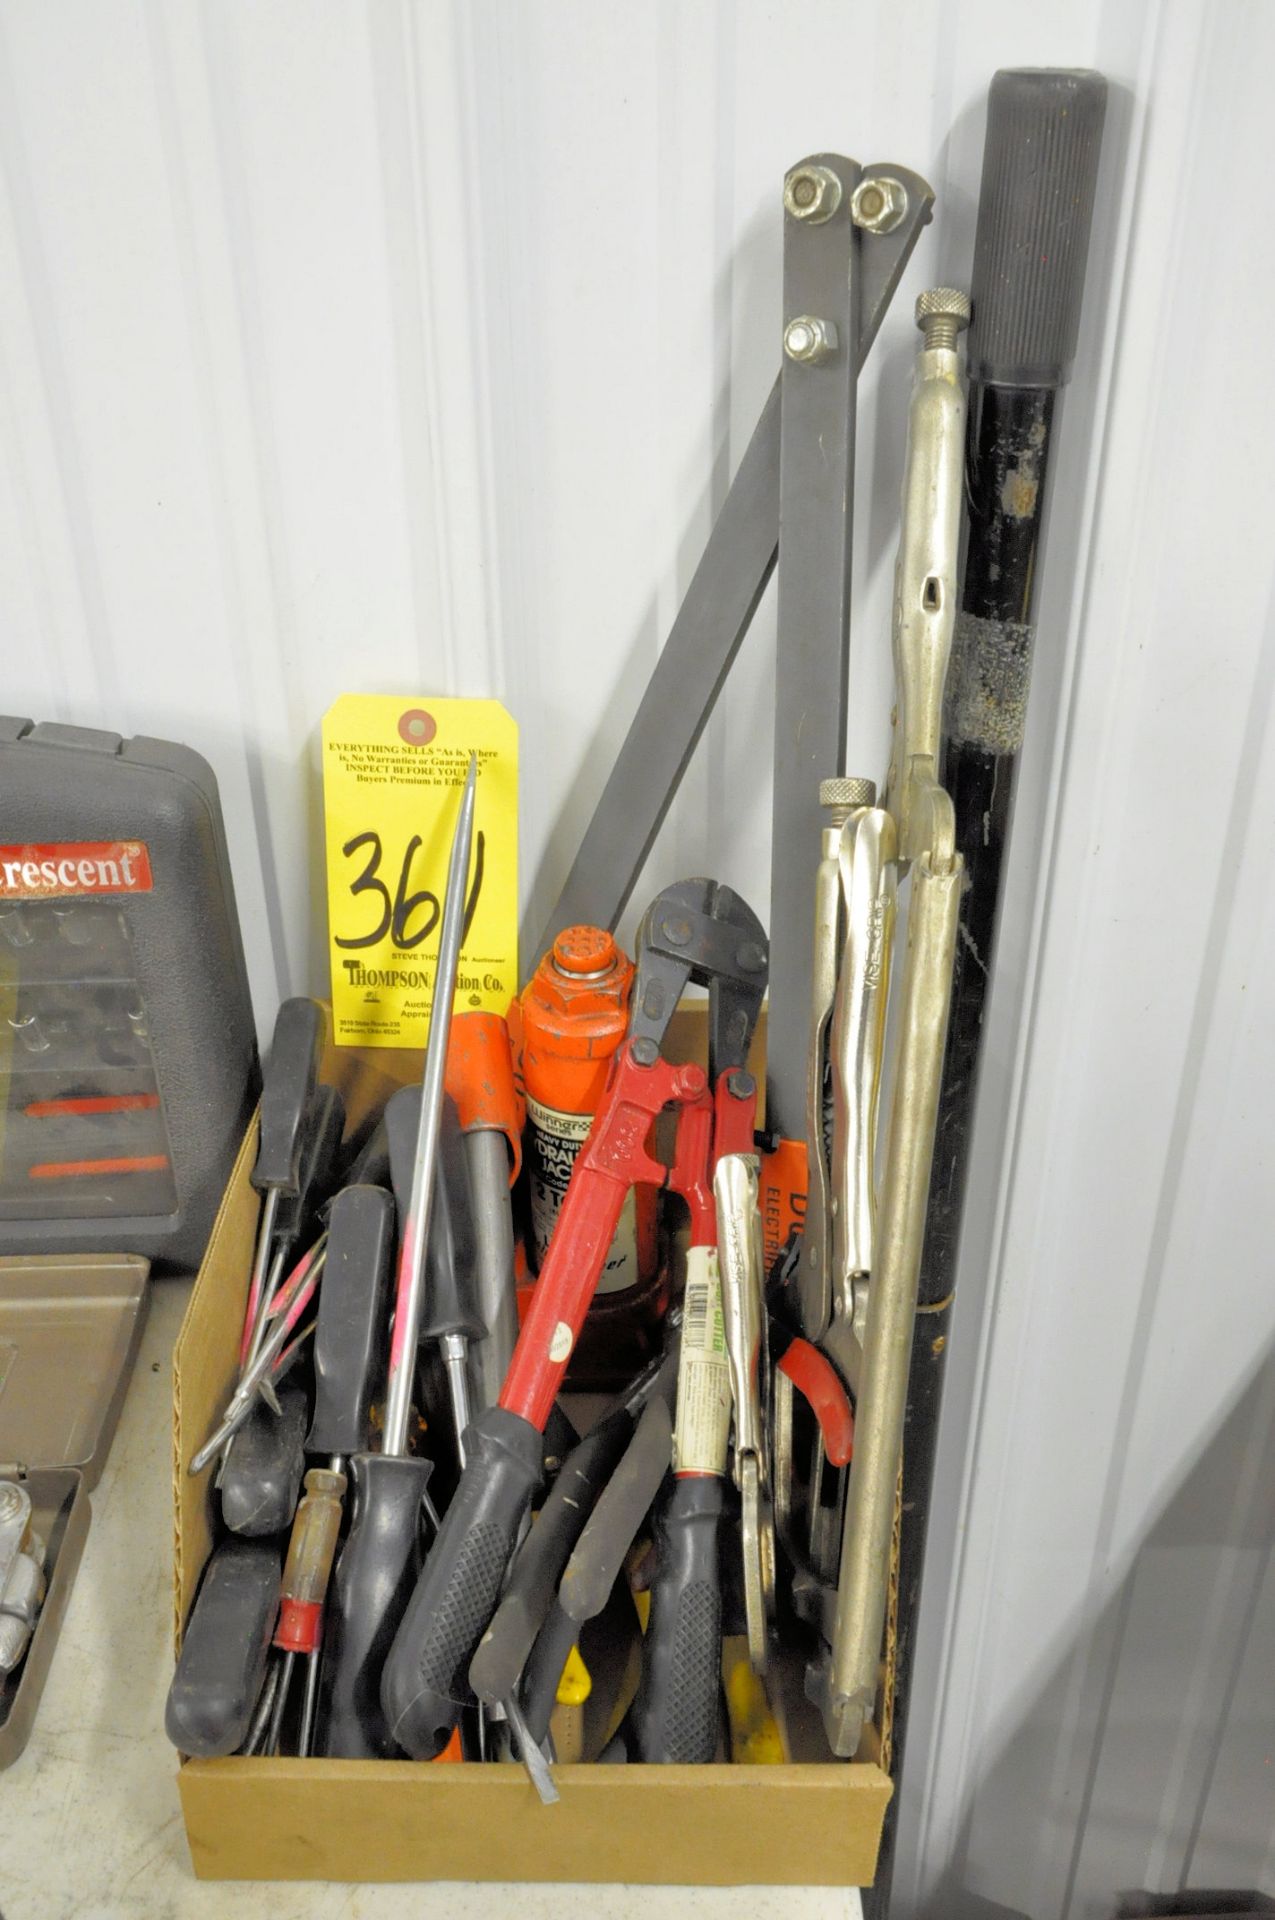 Lot-Asst'd Pliers, Hydraulic Jack, Small Bolt Cutters, Vise Grips and Adjustable Spanner Wrench